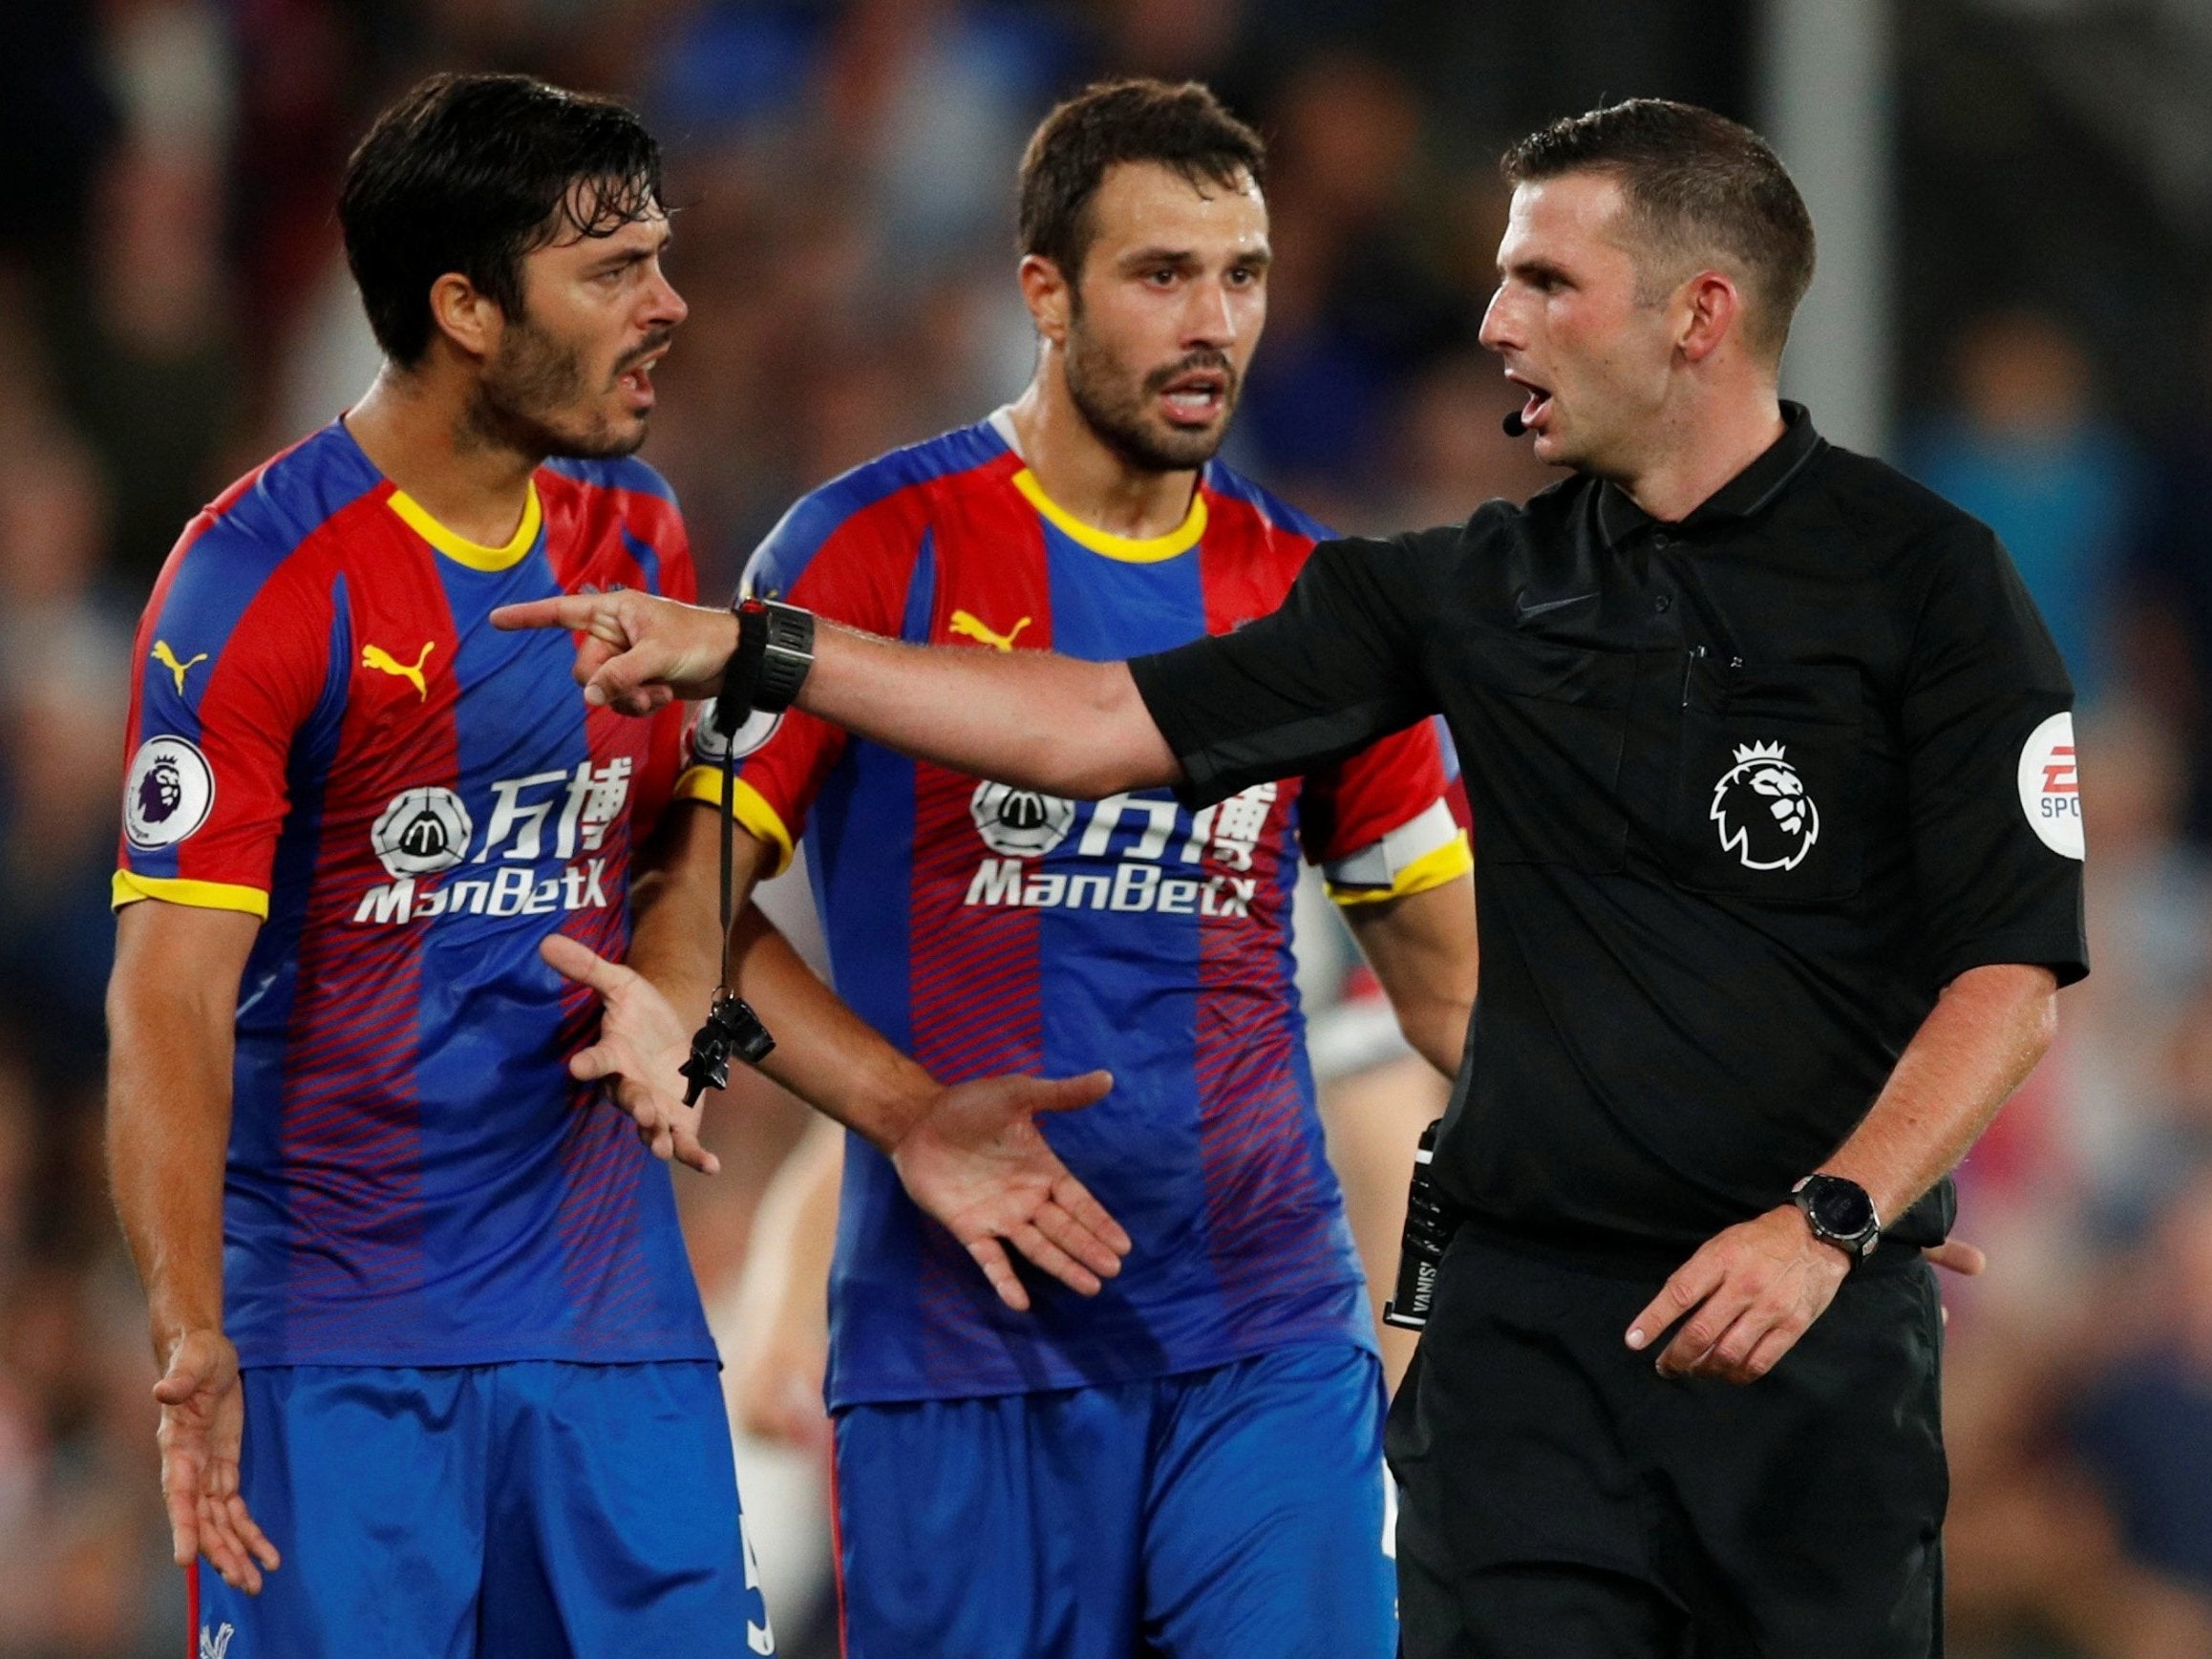 Michael Oliver gave Liverpool a penalty and sent off a Palace player